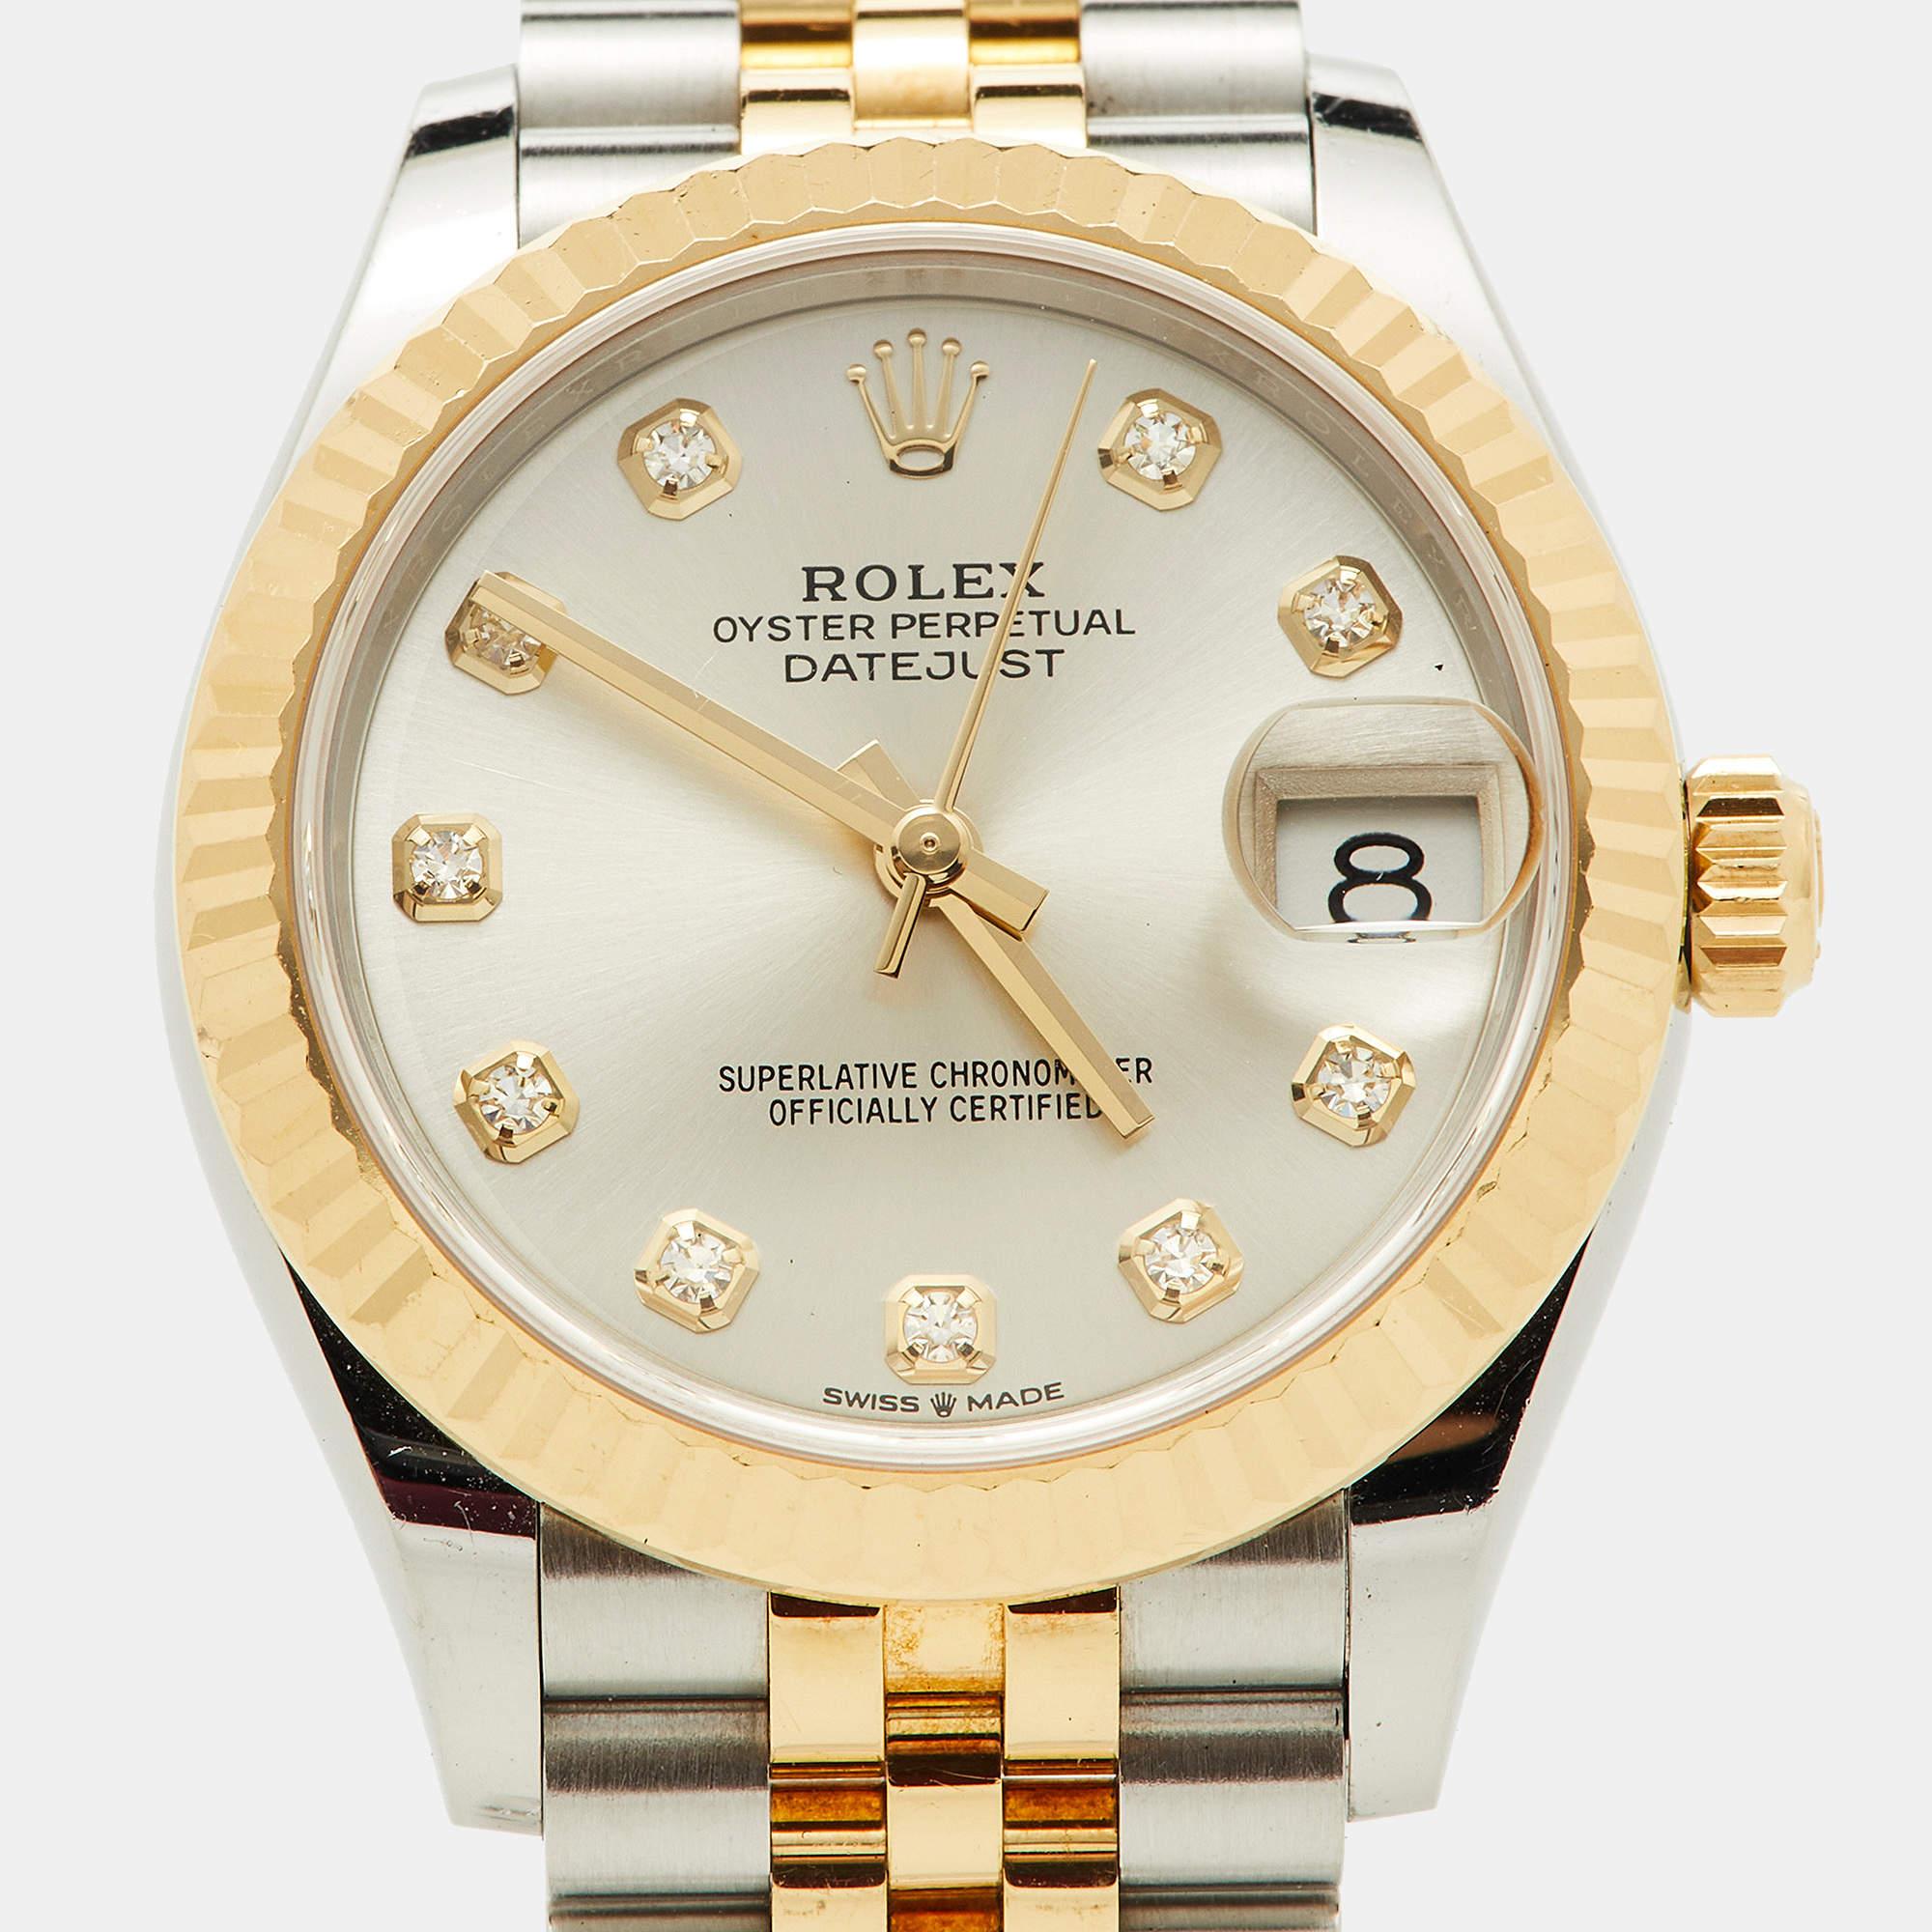 The Rolex Datejust is an exquisite women's wristwatch. It features a stunning silver sunburst dial, accented with diamonds, set within a 31mm case crafted from a luxurious combination of 18K yellow gold and stainless steel. This timepiece elegantly